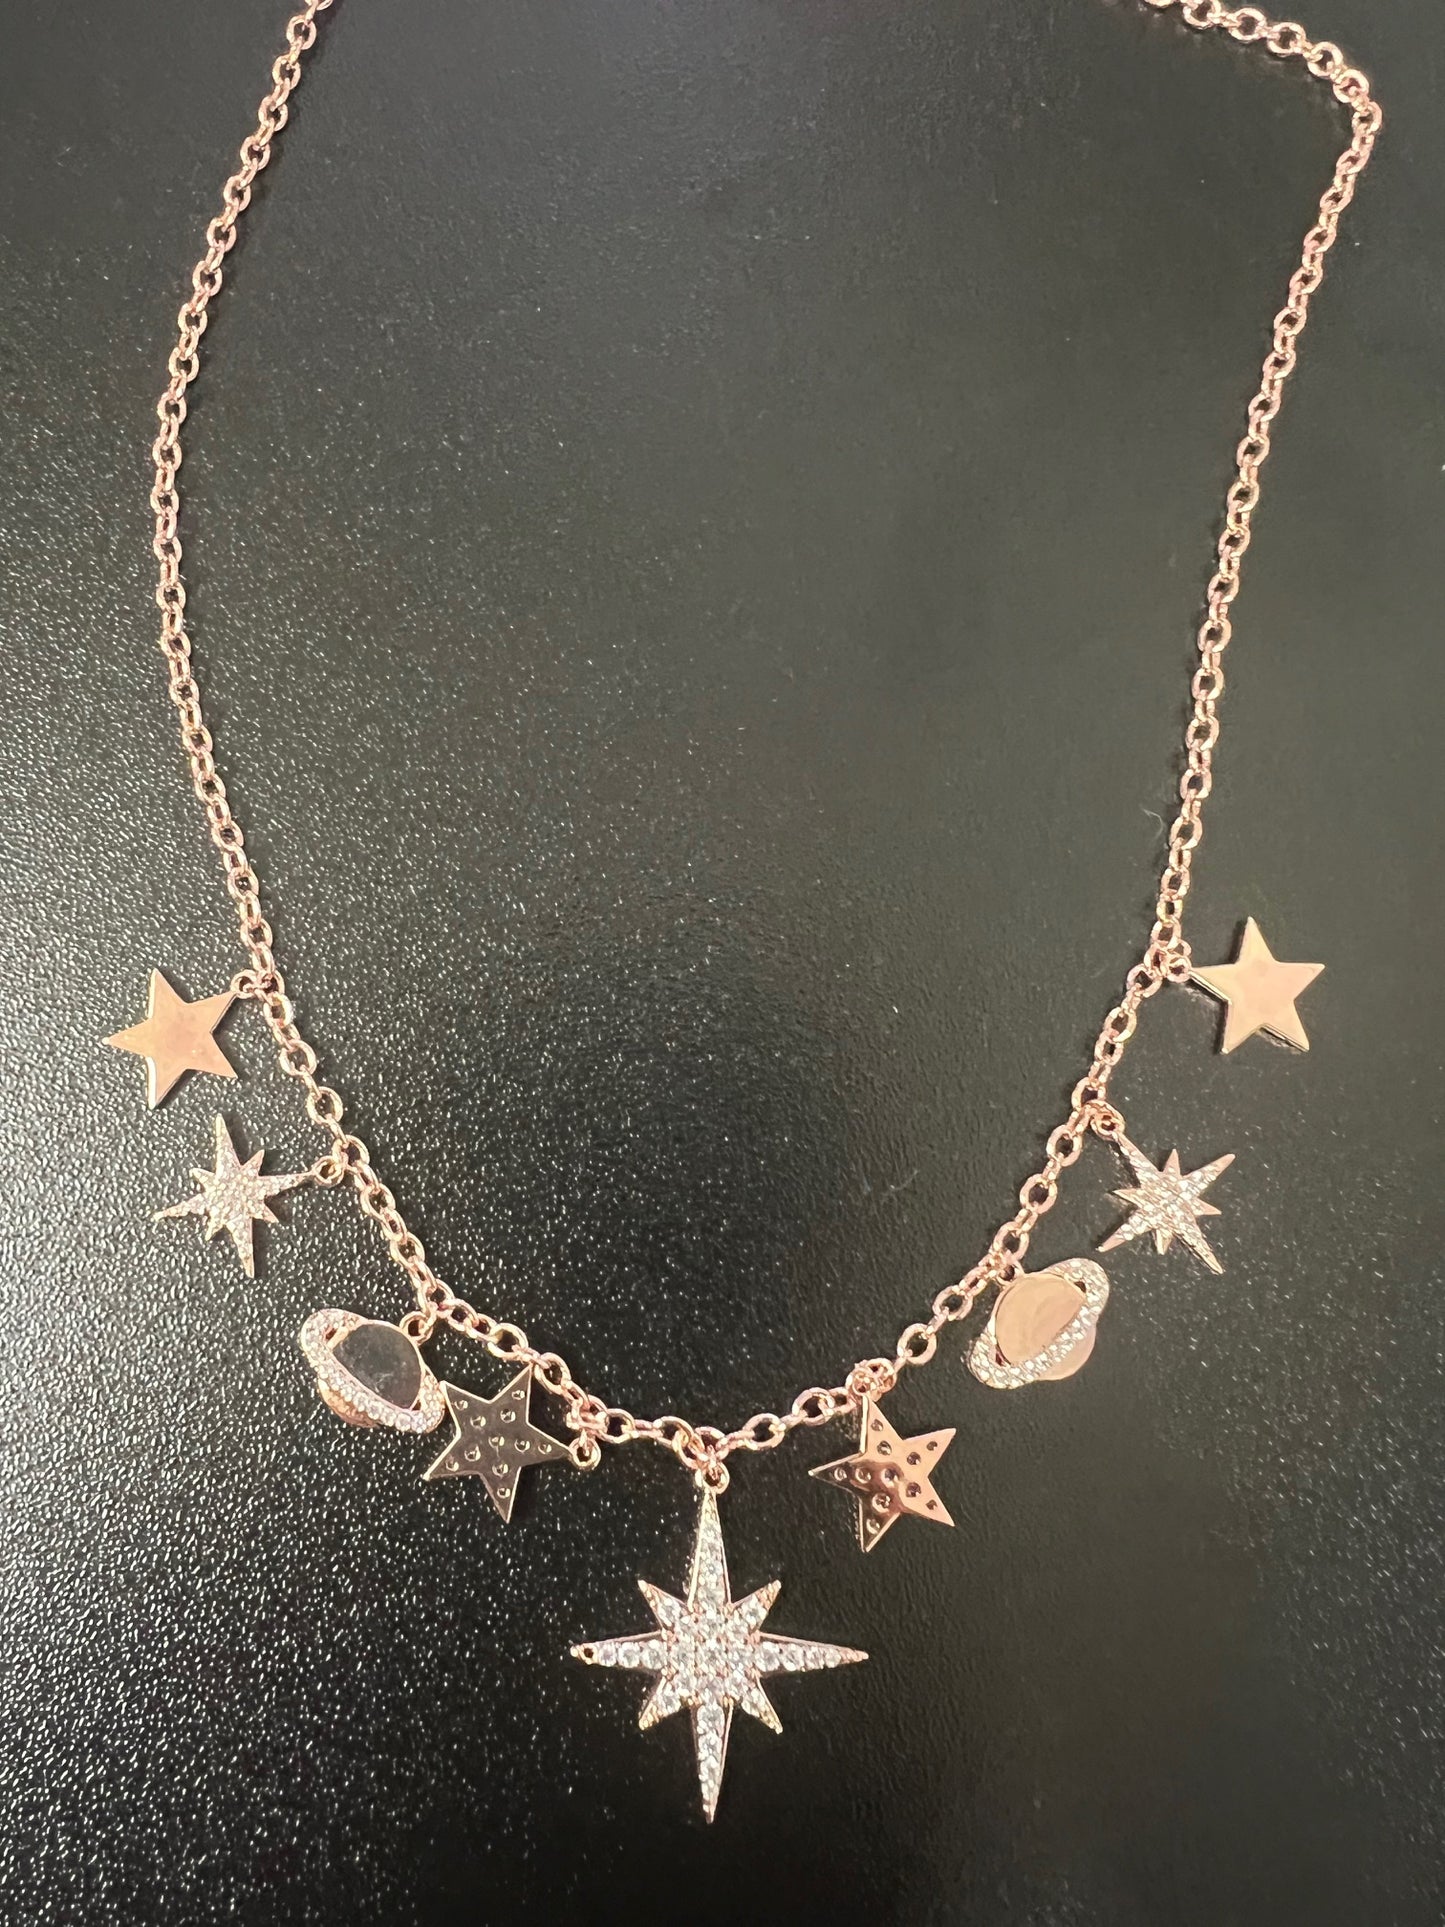 Shannons Intergalactic Rose Gold Necklace